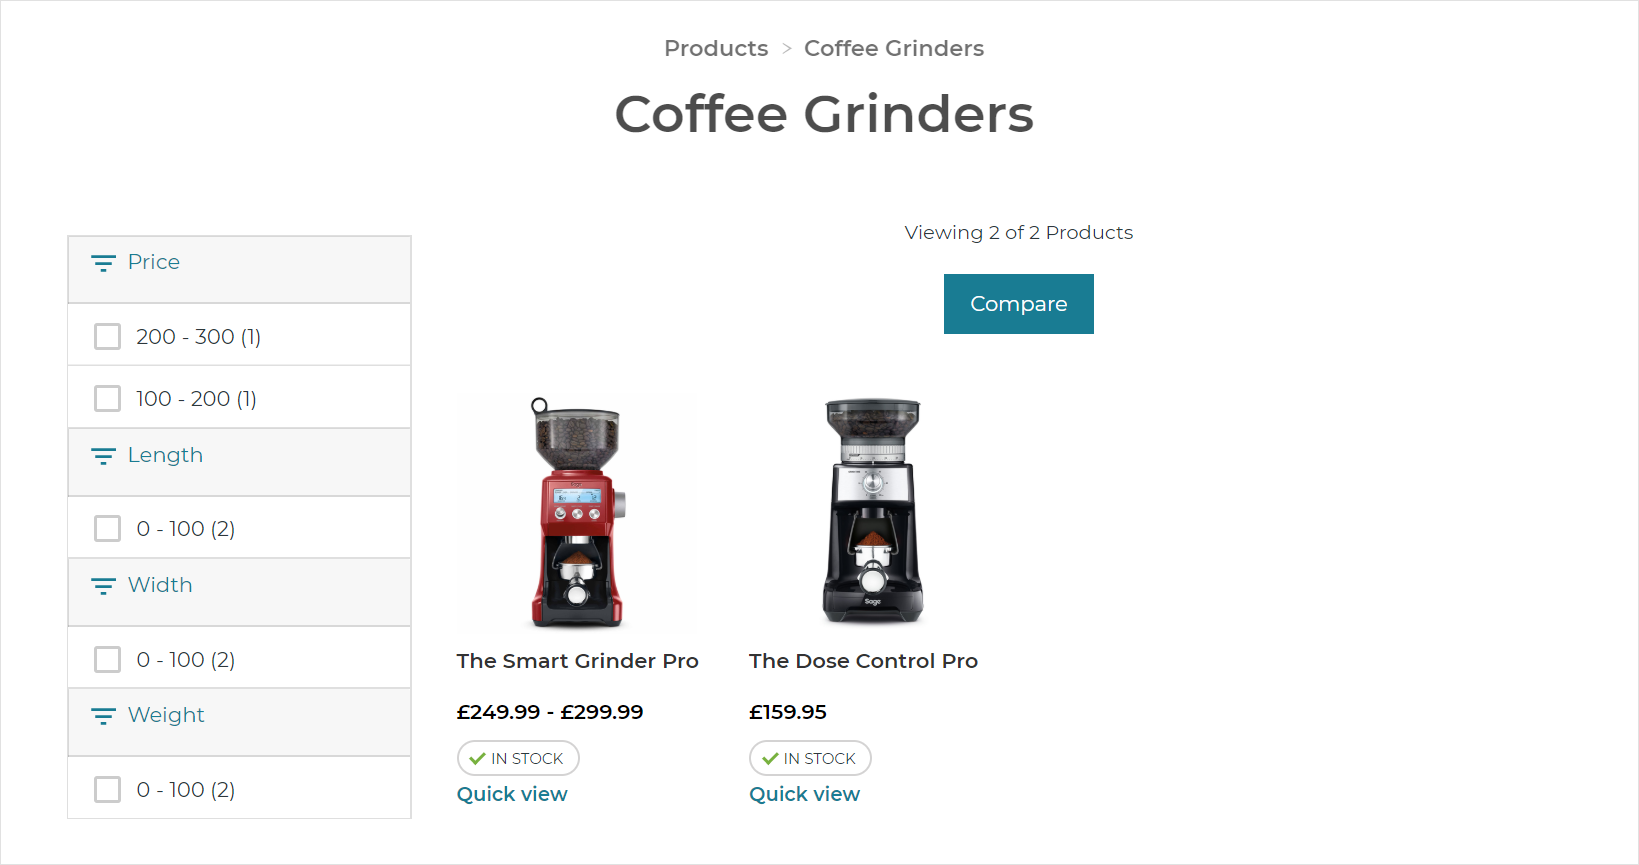 Shows the results of selecting Products and then Coffee Grinders